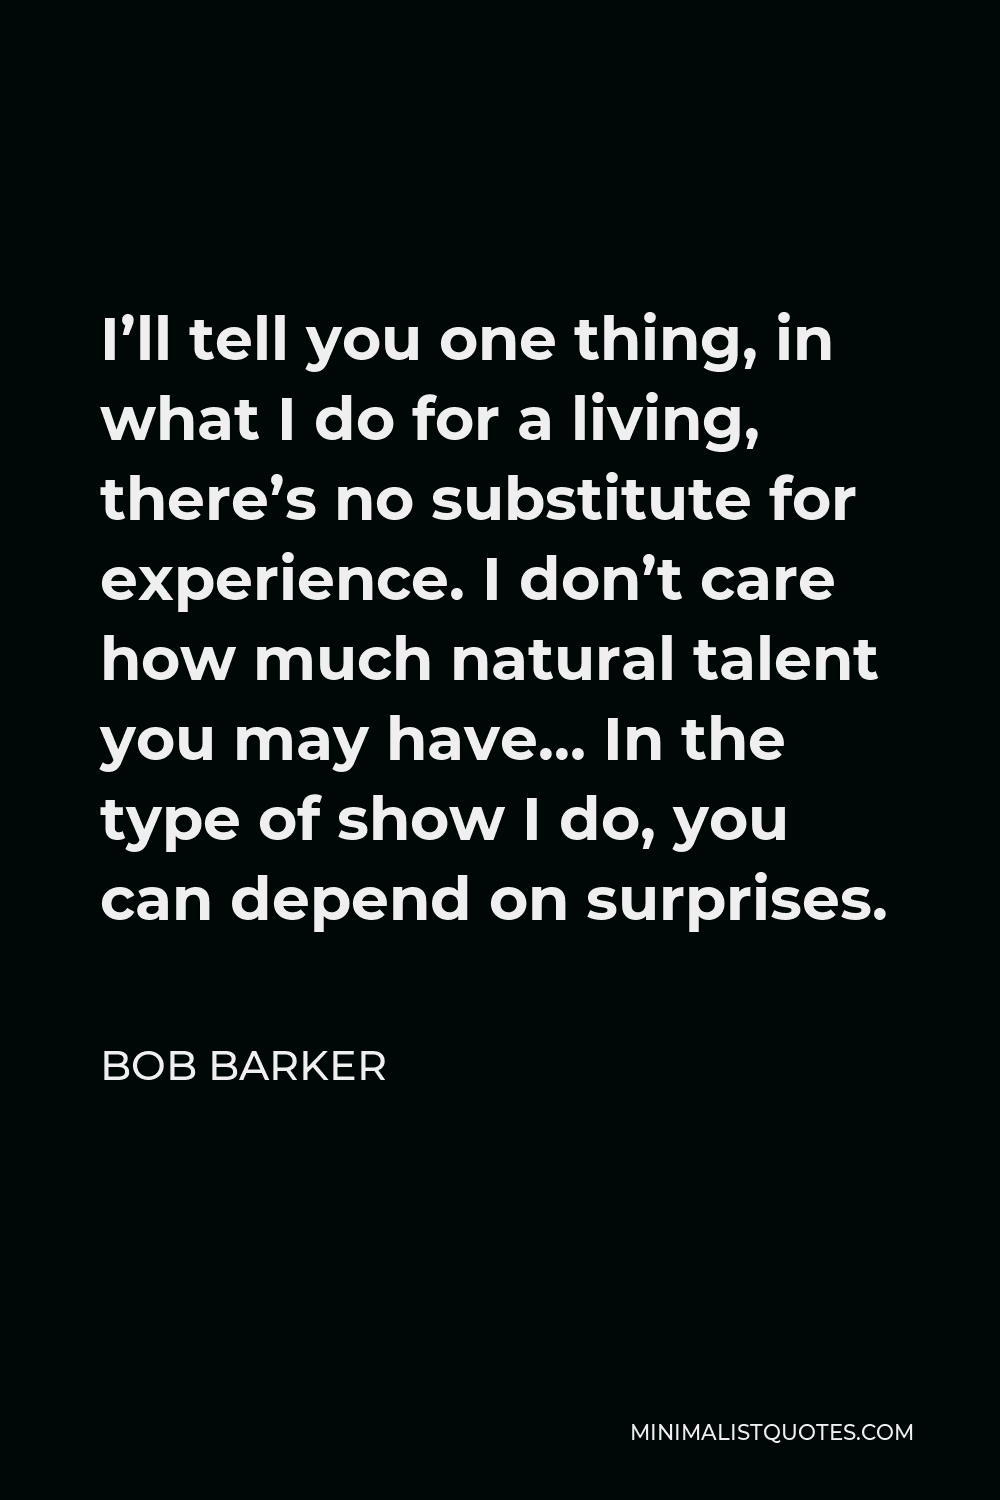 Bob Barker Quote - I’ll tell you one thing, in what I do for a living, there’s no substitute for experience. I don’t care how much natural talent you may have… In the type of show I do, you can depend on surprises.